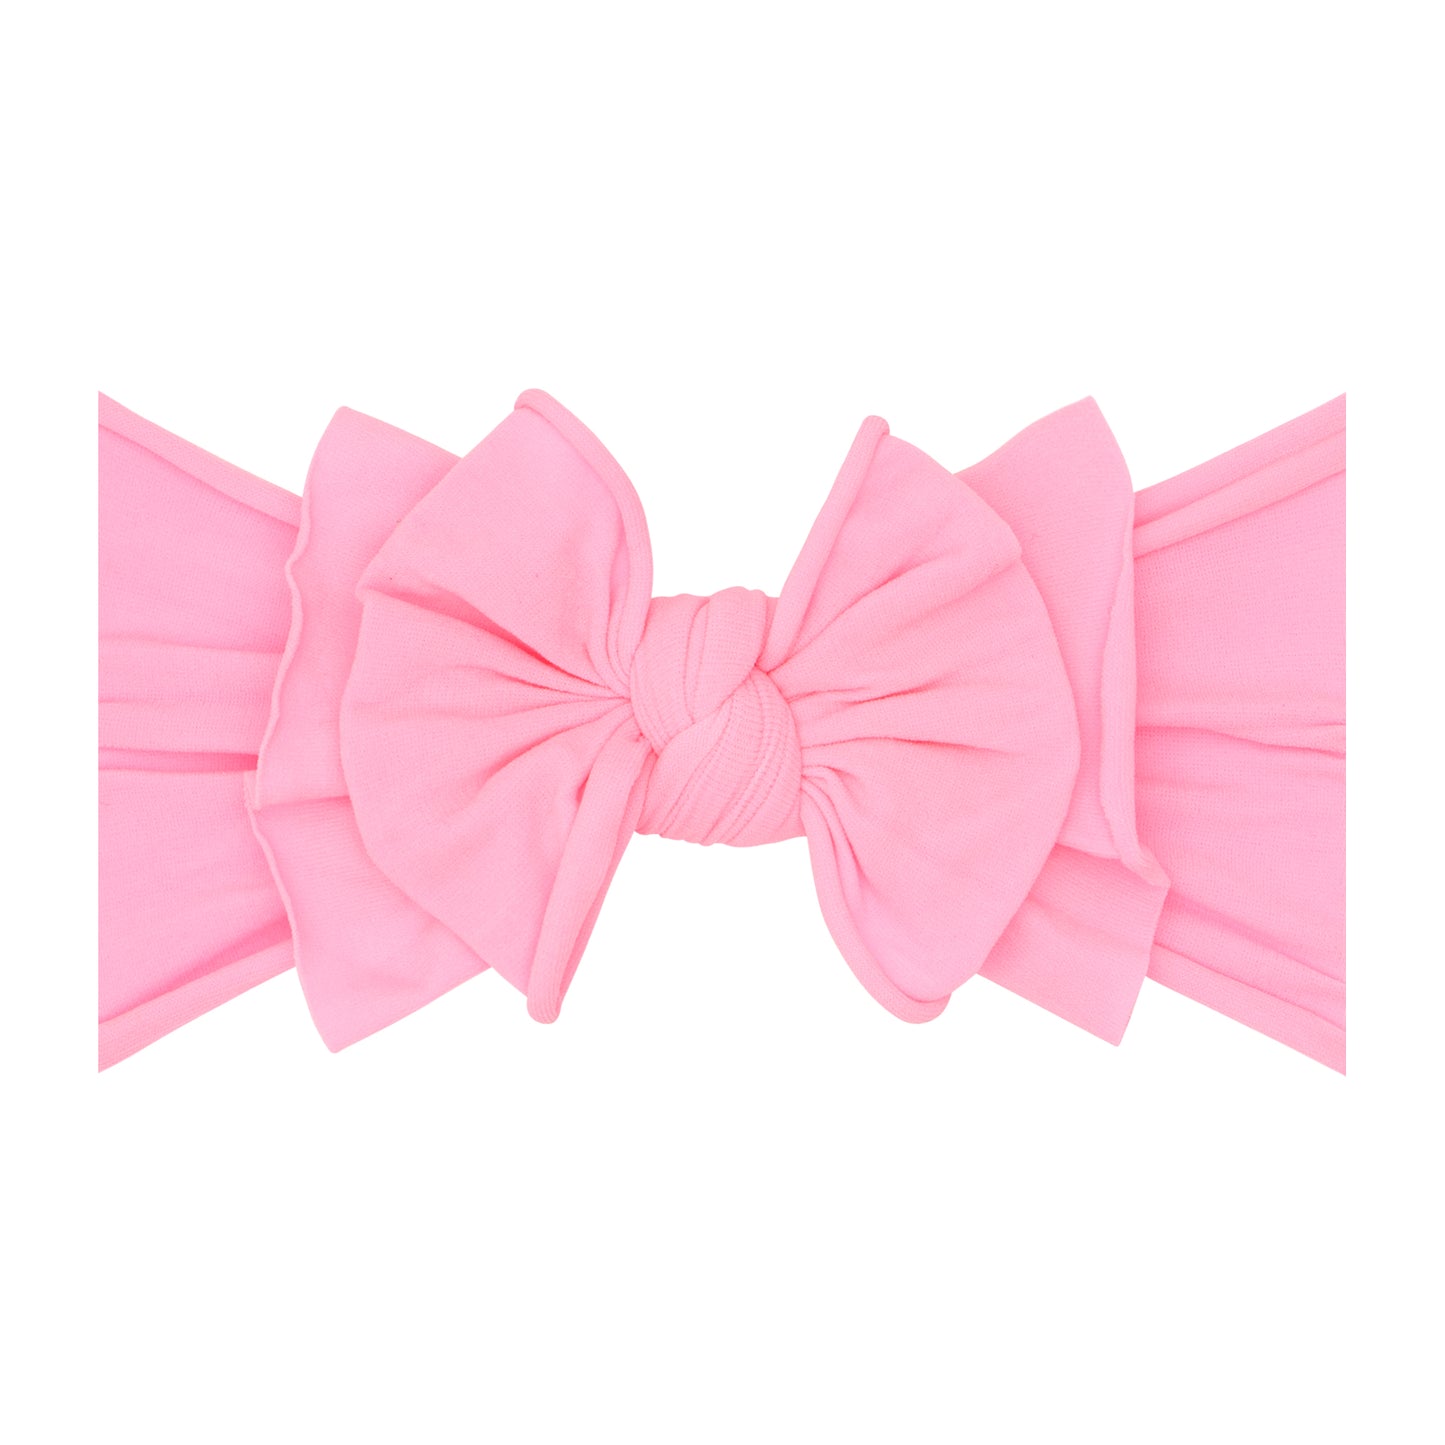 FAB-BOW-LOUS® HEABAND: neon pink-a-boo